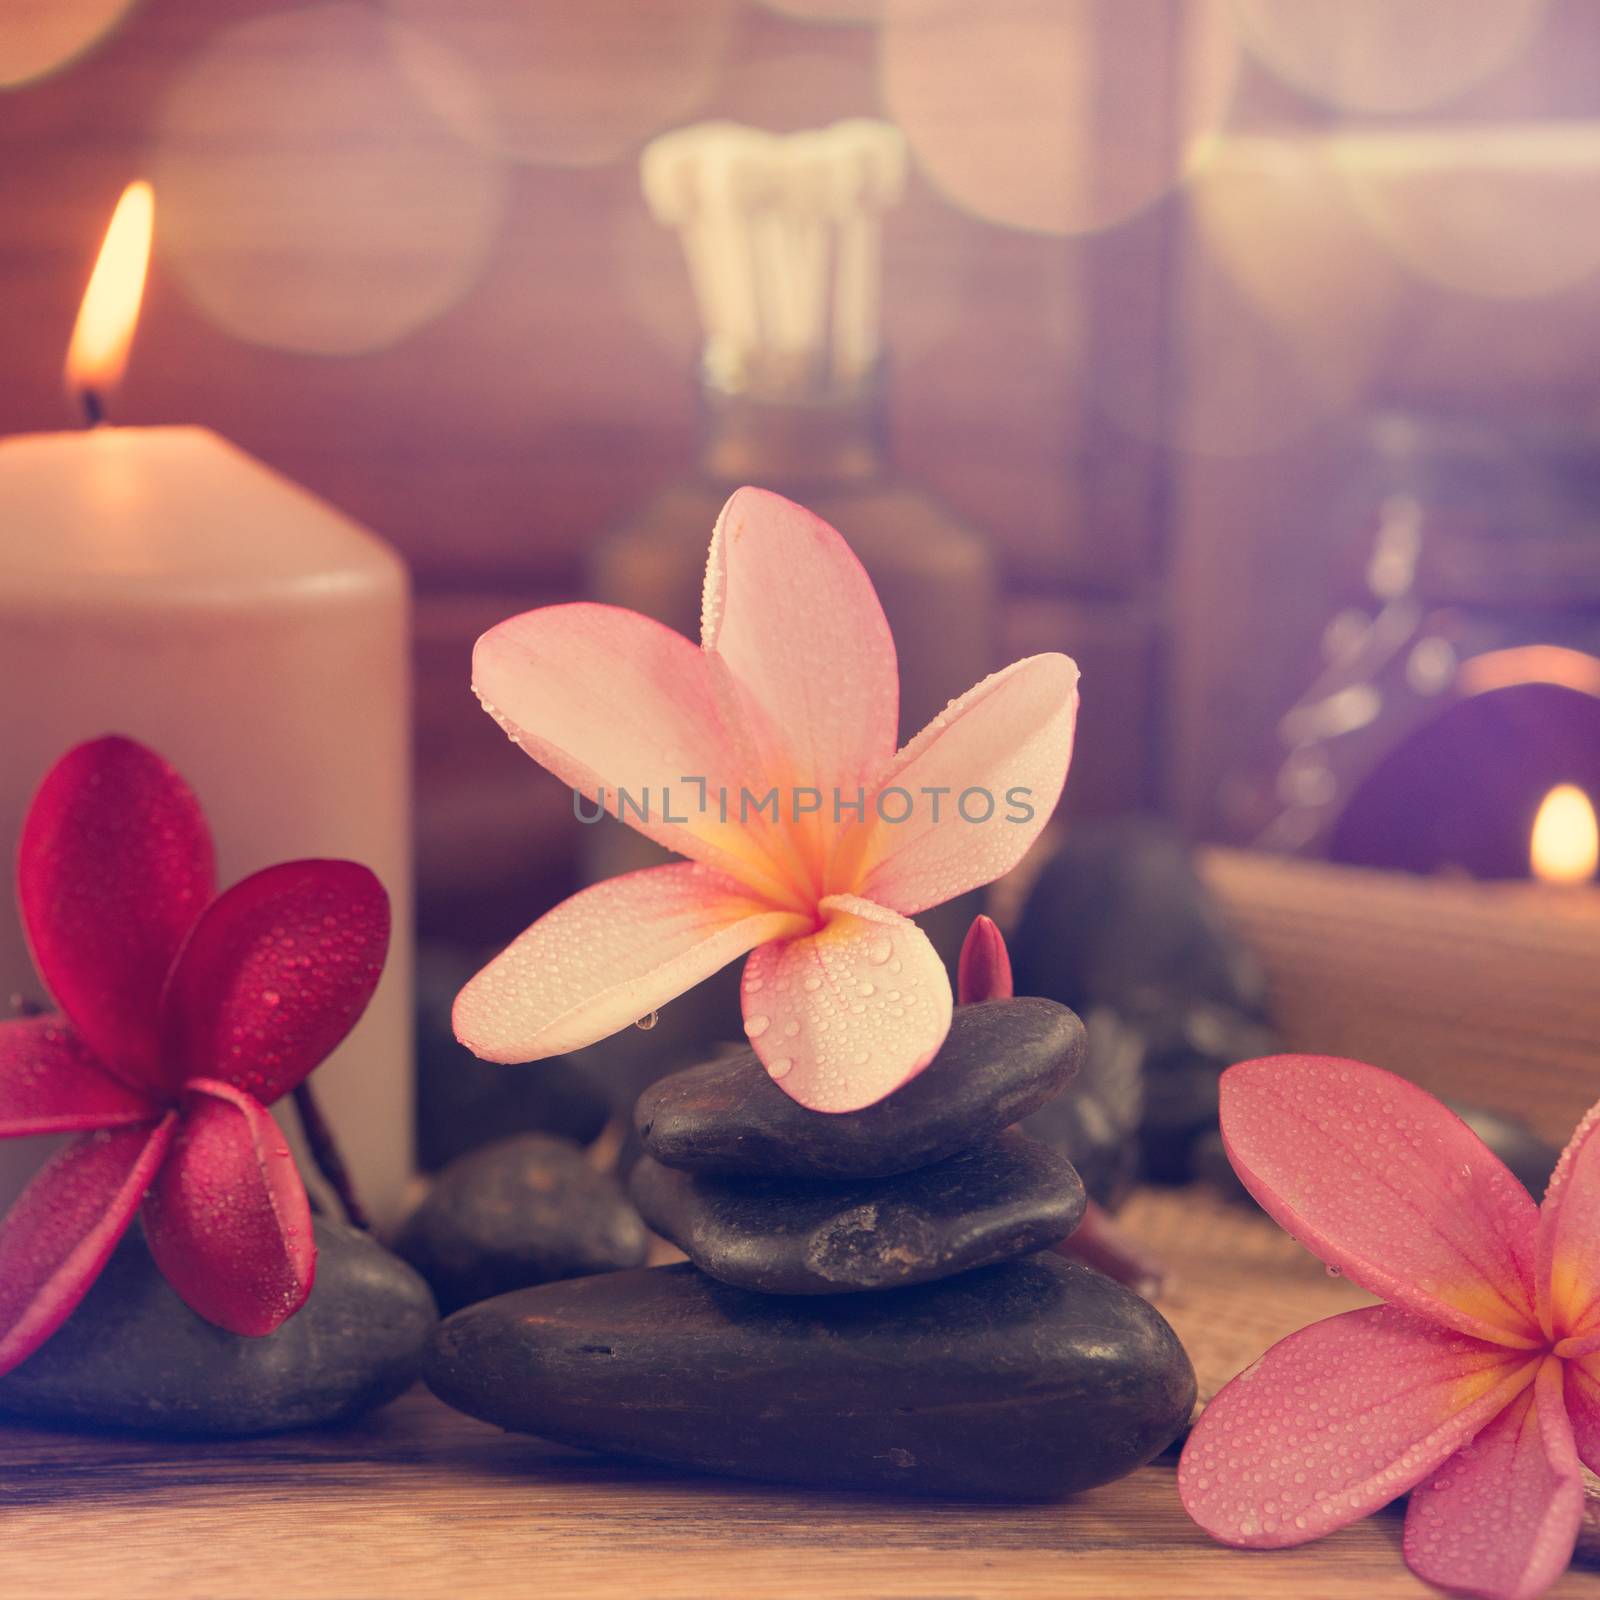 Spa setting with frangipani flower, essential oil, zen stones and aromatic candles on table, Zen concept in vintage retro style.